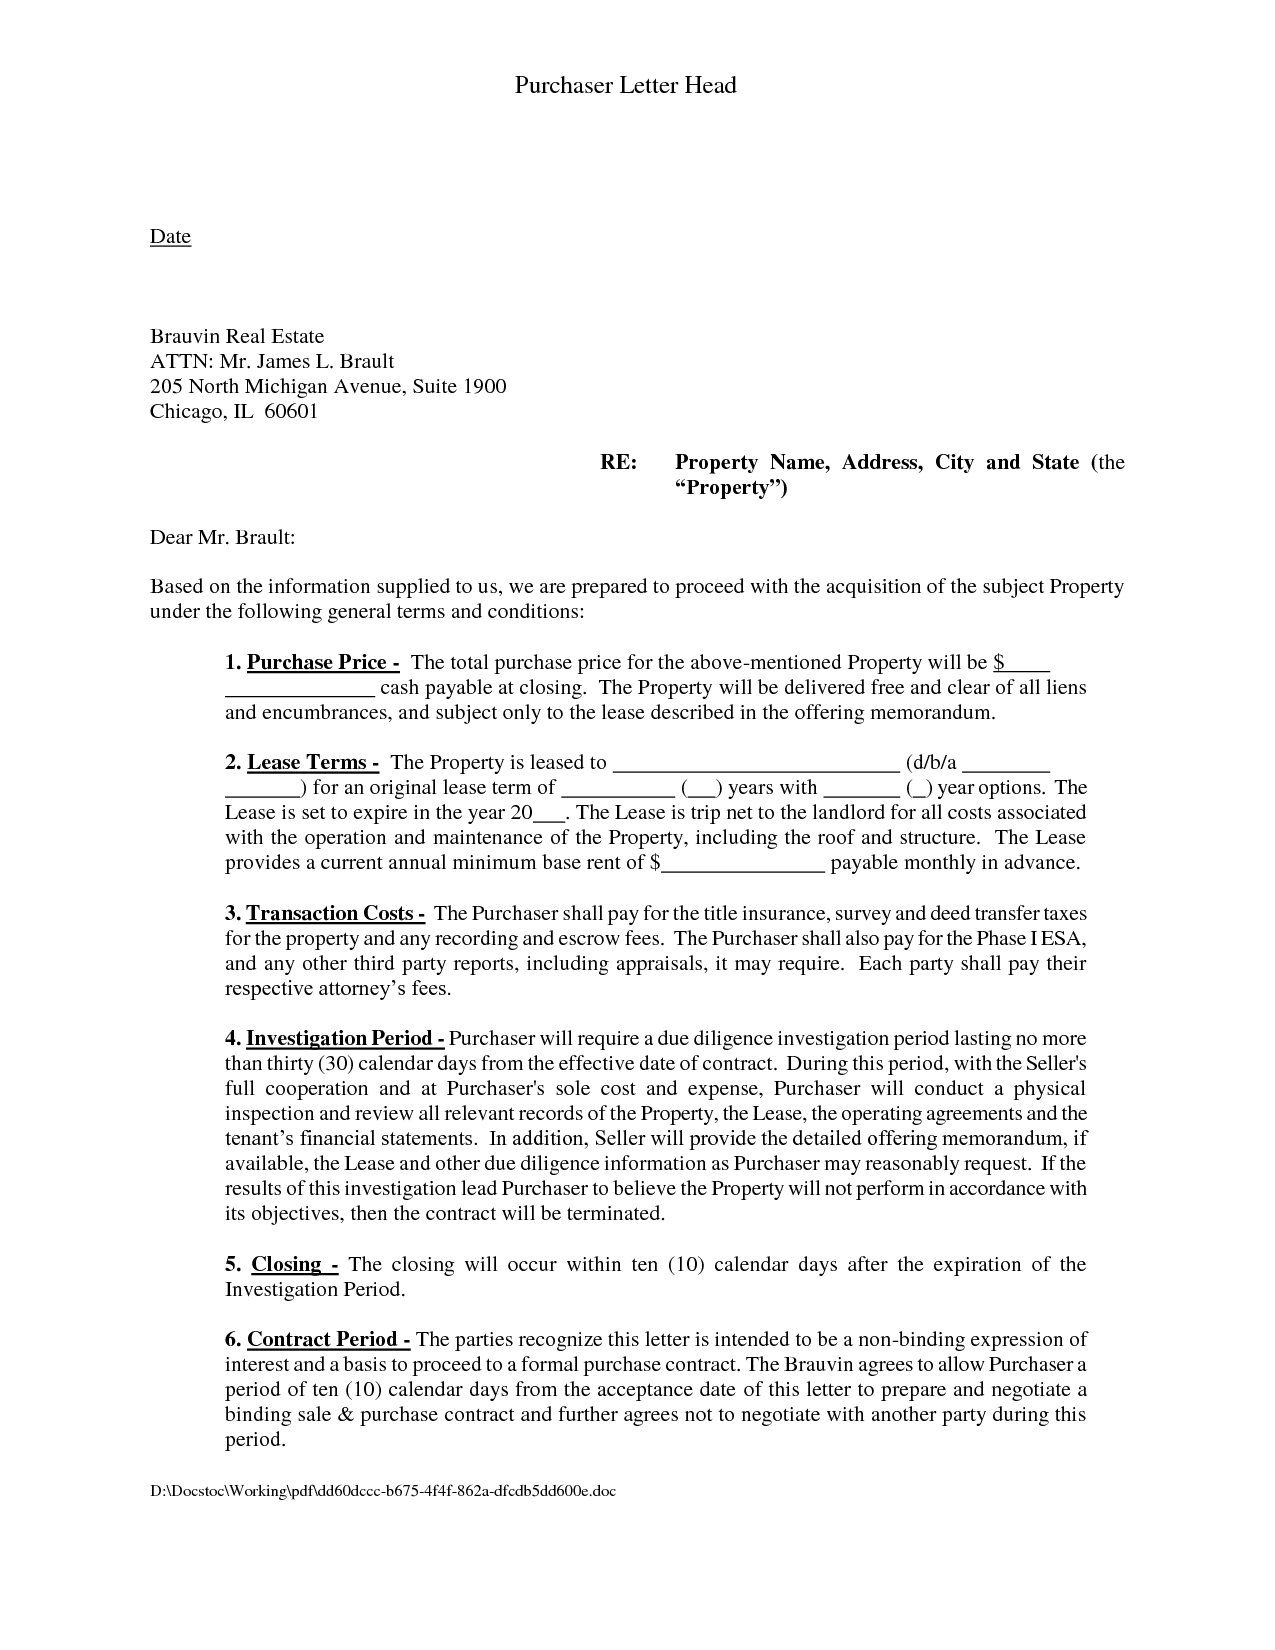 Real Estate Letter Of Intent Template Free - Mercial Letter Intent Template to Lease Space Real Estate